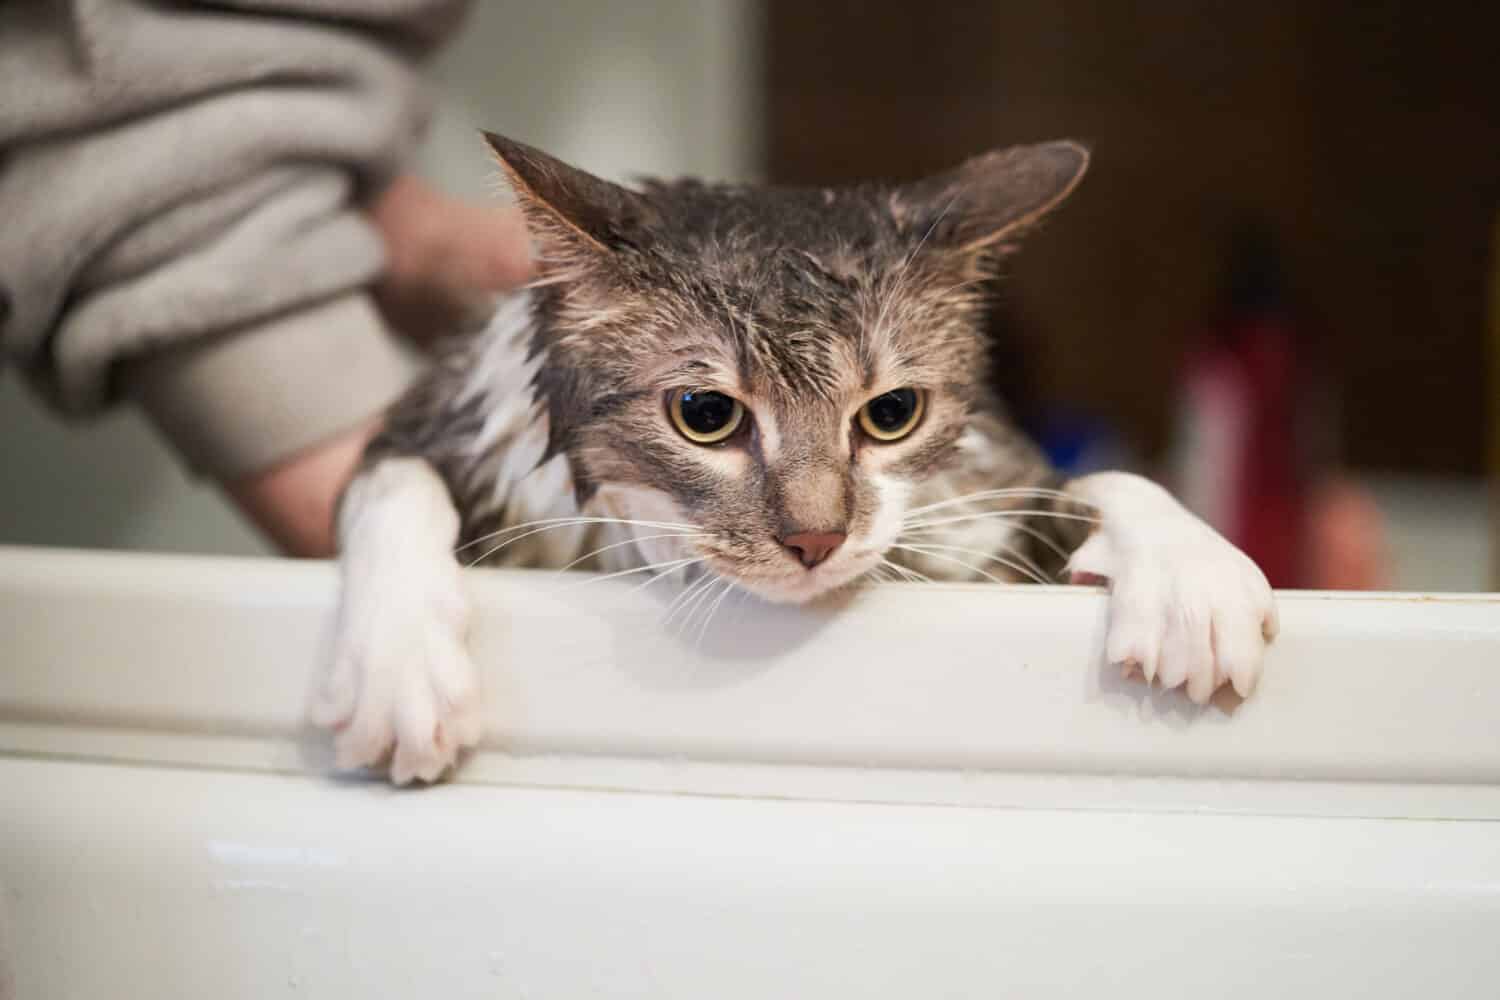 Bath or shower to domestic  cat ,feel scared, cat hate bath time.